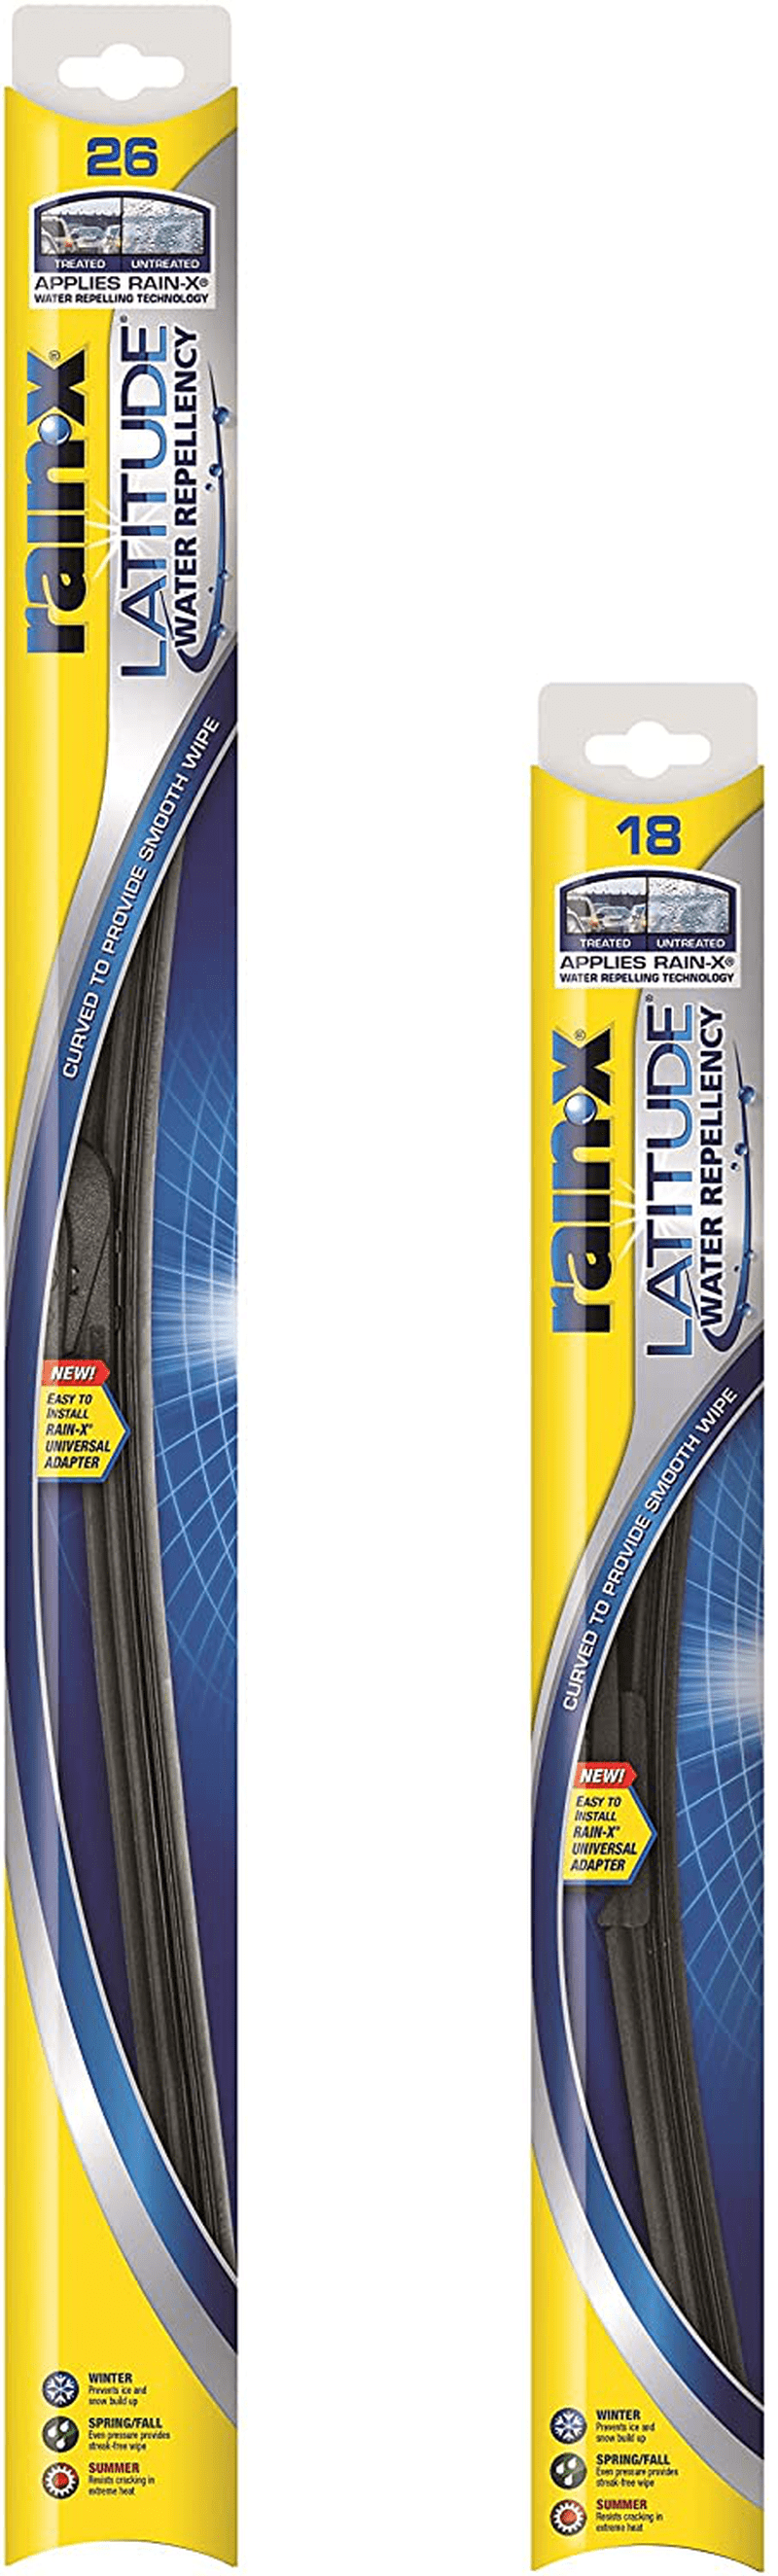 Rain-X - 810163 Latitude Water Repellency Wiper Blade Combo Pack 26" and 16" Vehicles & Parts > Vehicle Parts & Accessories > Motor Vehicle Parts Rain-X 2-pack 26 / 18 in combo 